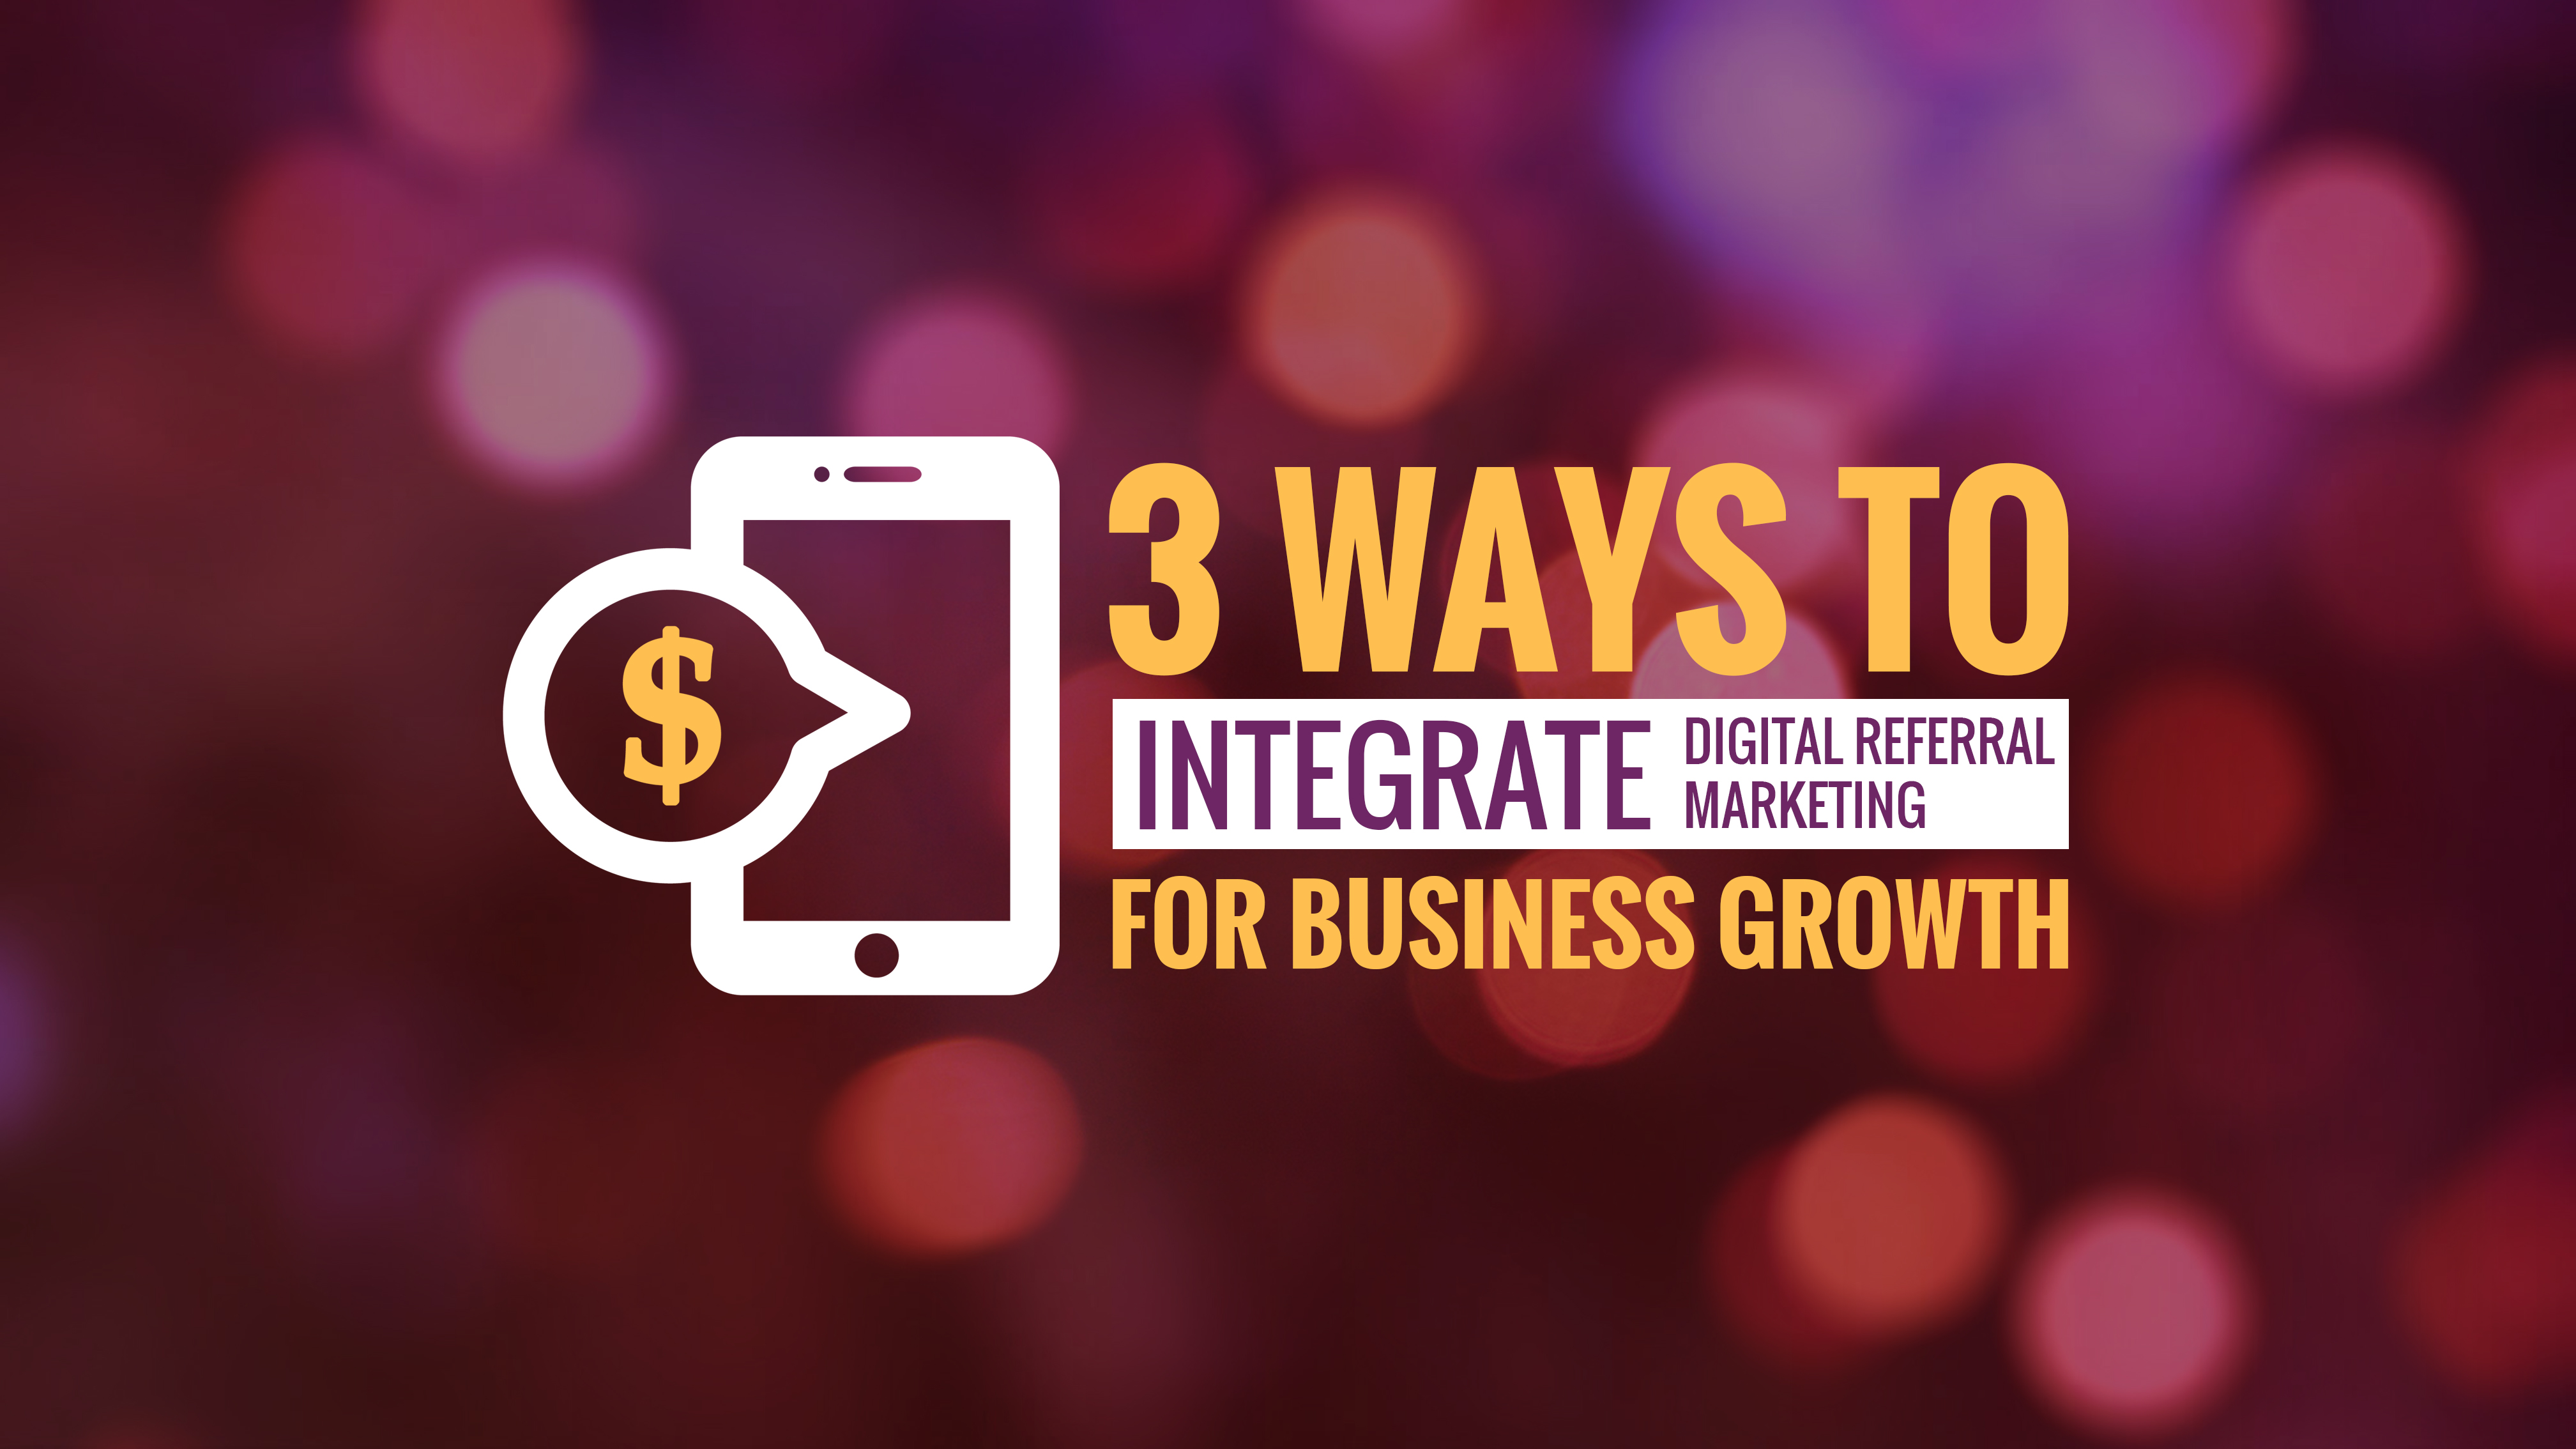 3-ways-to-integrate-digital-referral-marketing-for-business-growth